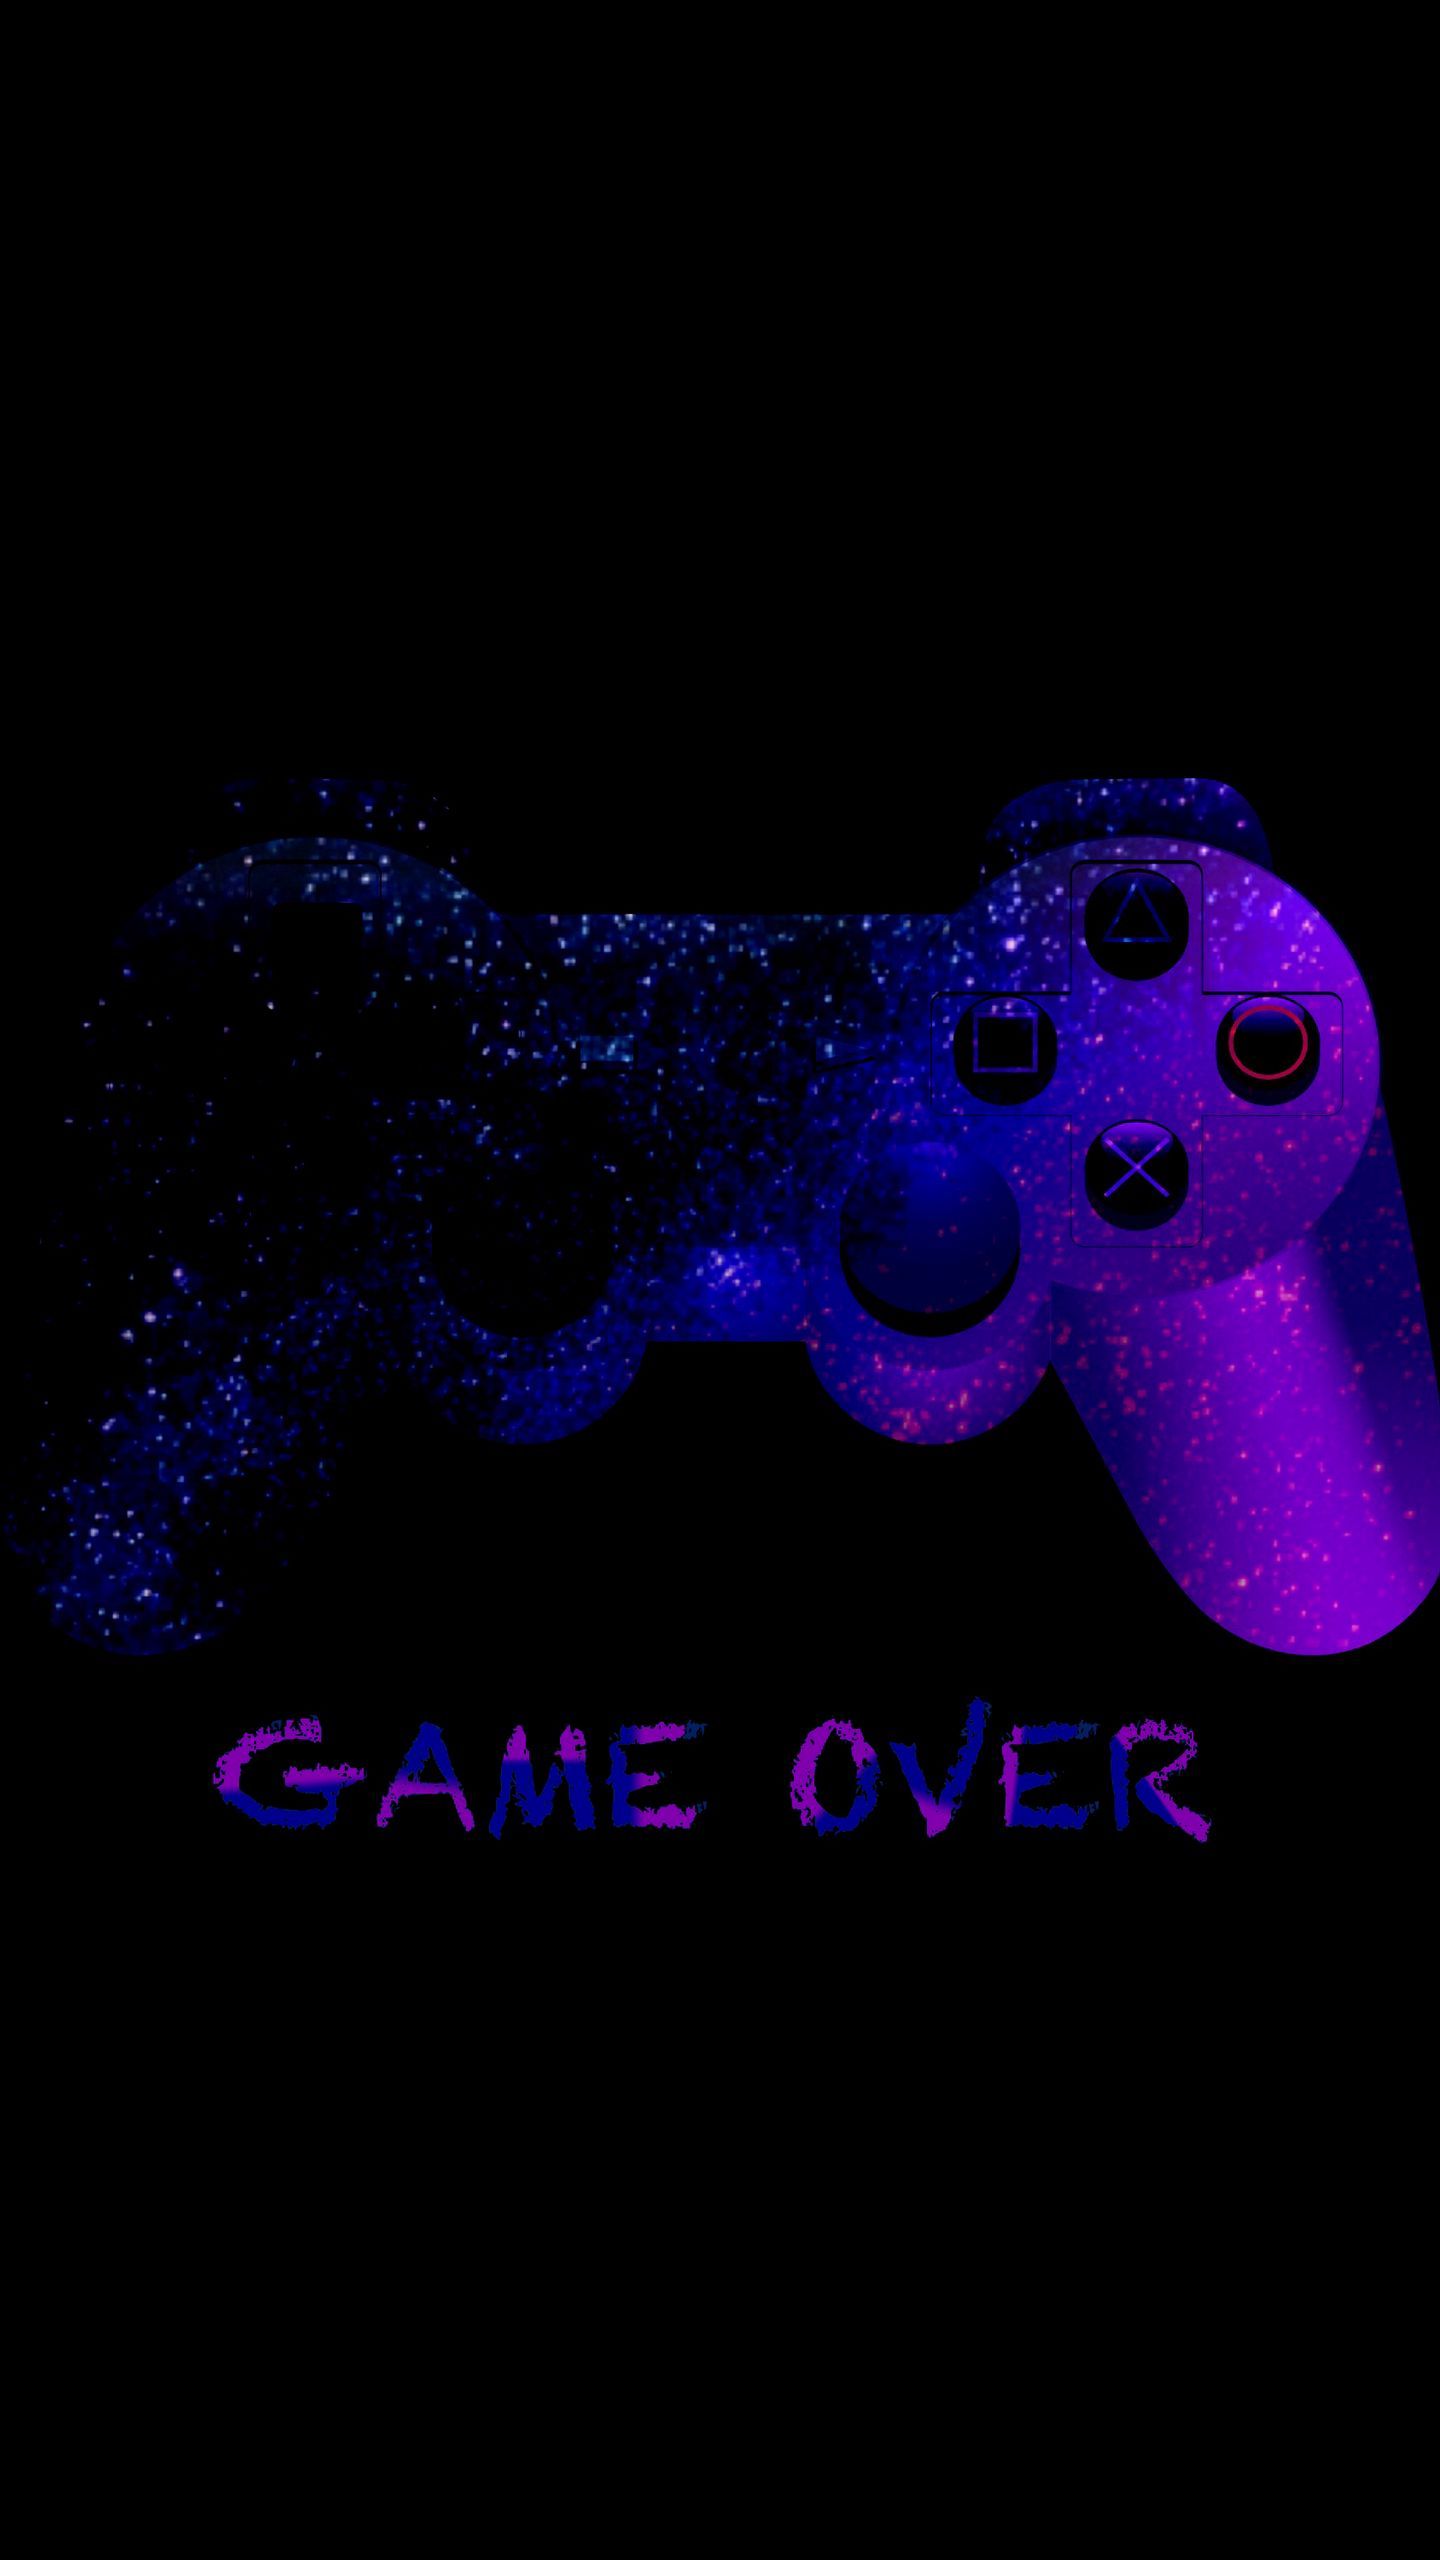 Download wallpaper 1440x2560 game over, joystick, controller, gamepad, neon qhd samsung galaxy s s edge, note, lg g4 HD background